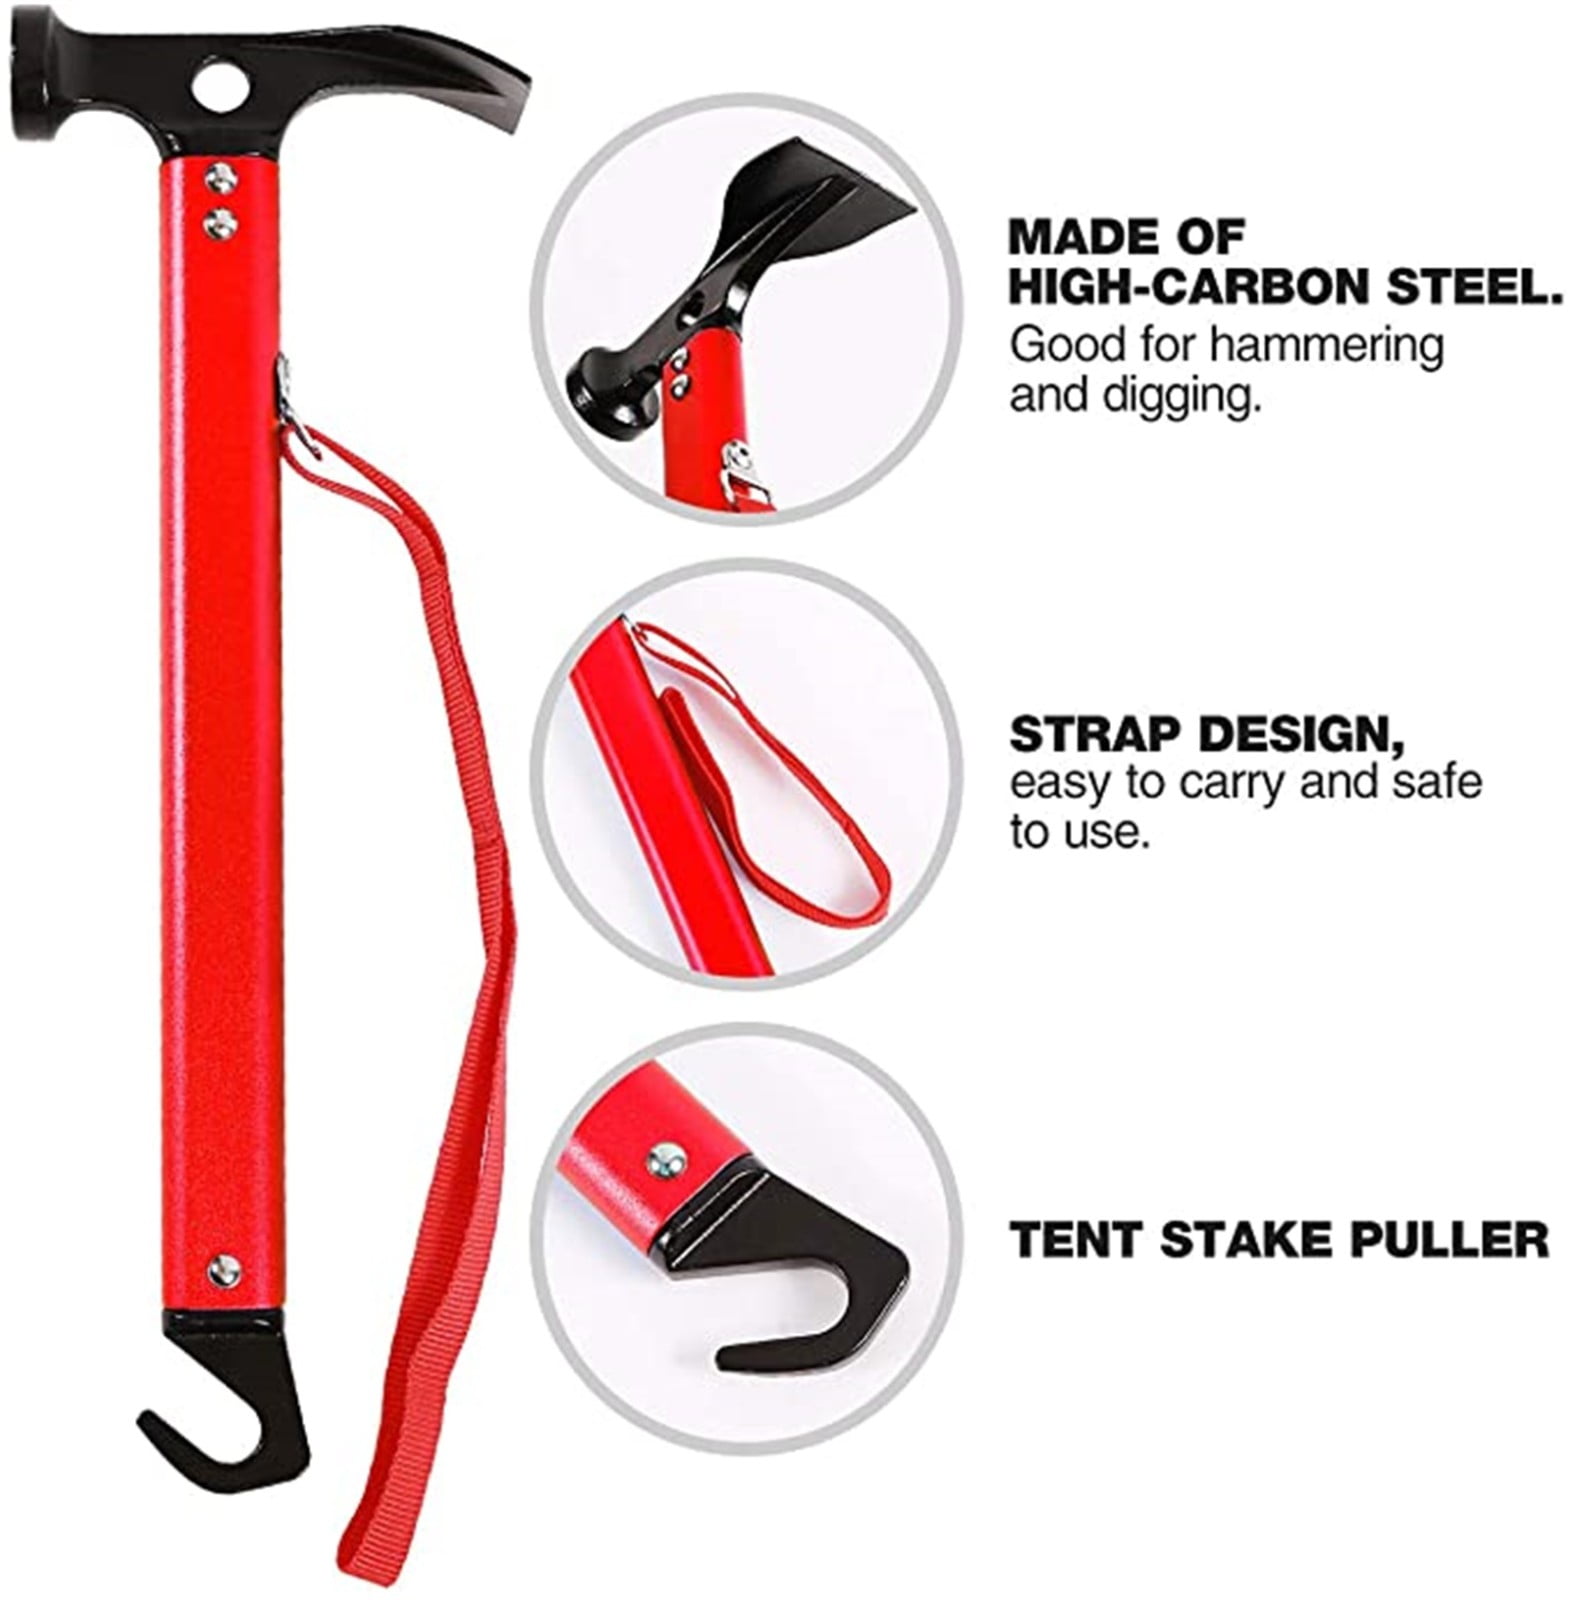 Mallet Hammer Tent Peg Stake Puller High-carbon Steel Shaft Camping Hiking Tool 